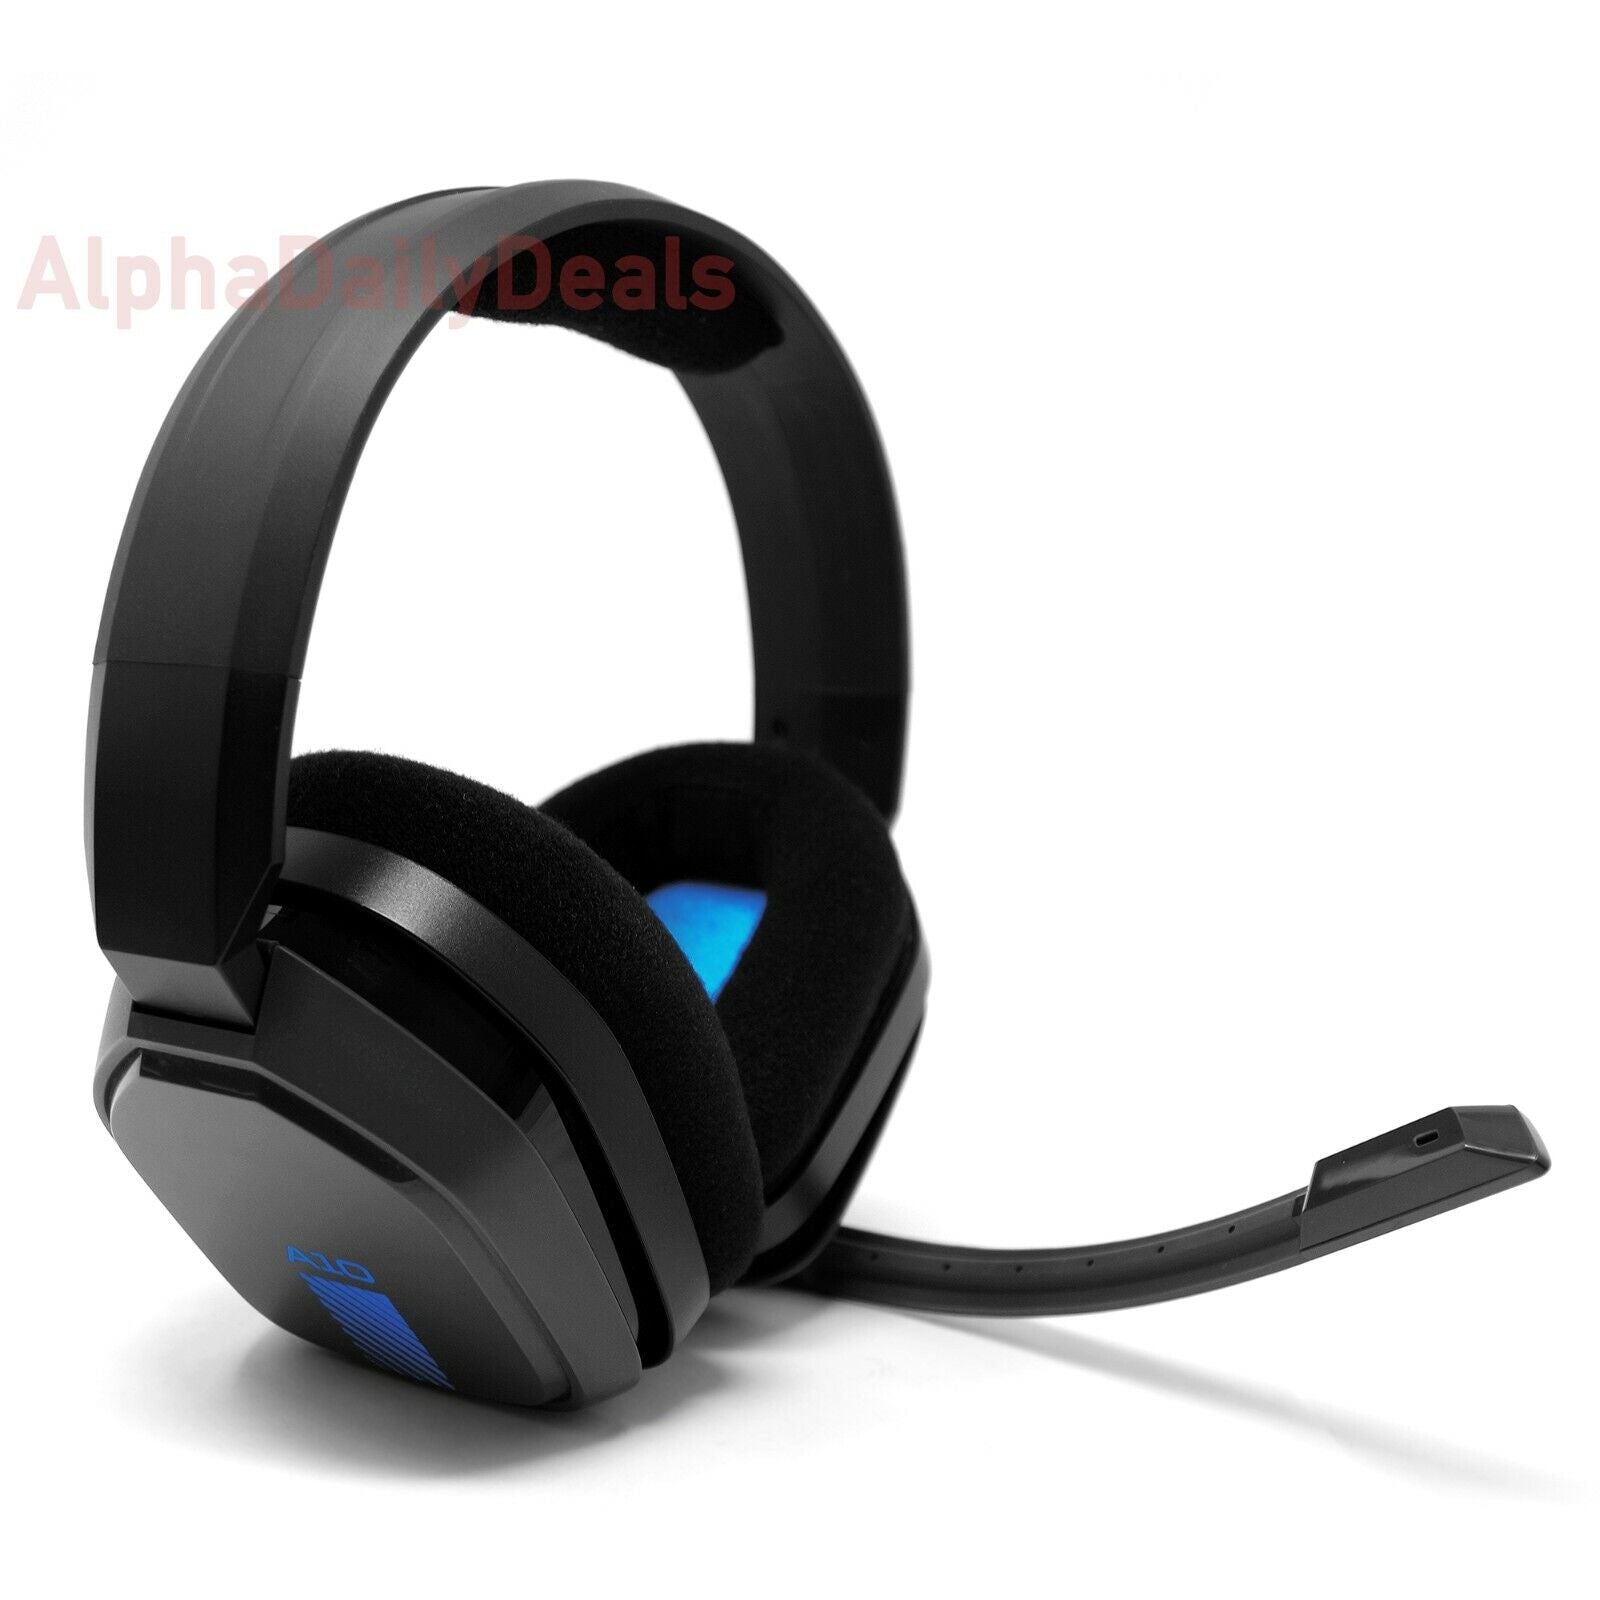 ASTRO A10 Wired Gaming Headset Headphones with Mic PC MAC PS4 XBOX ONE 3.5mm